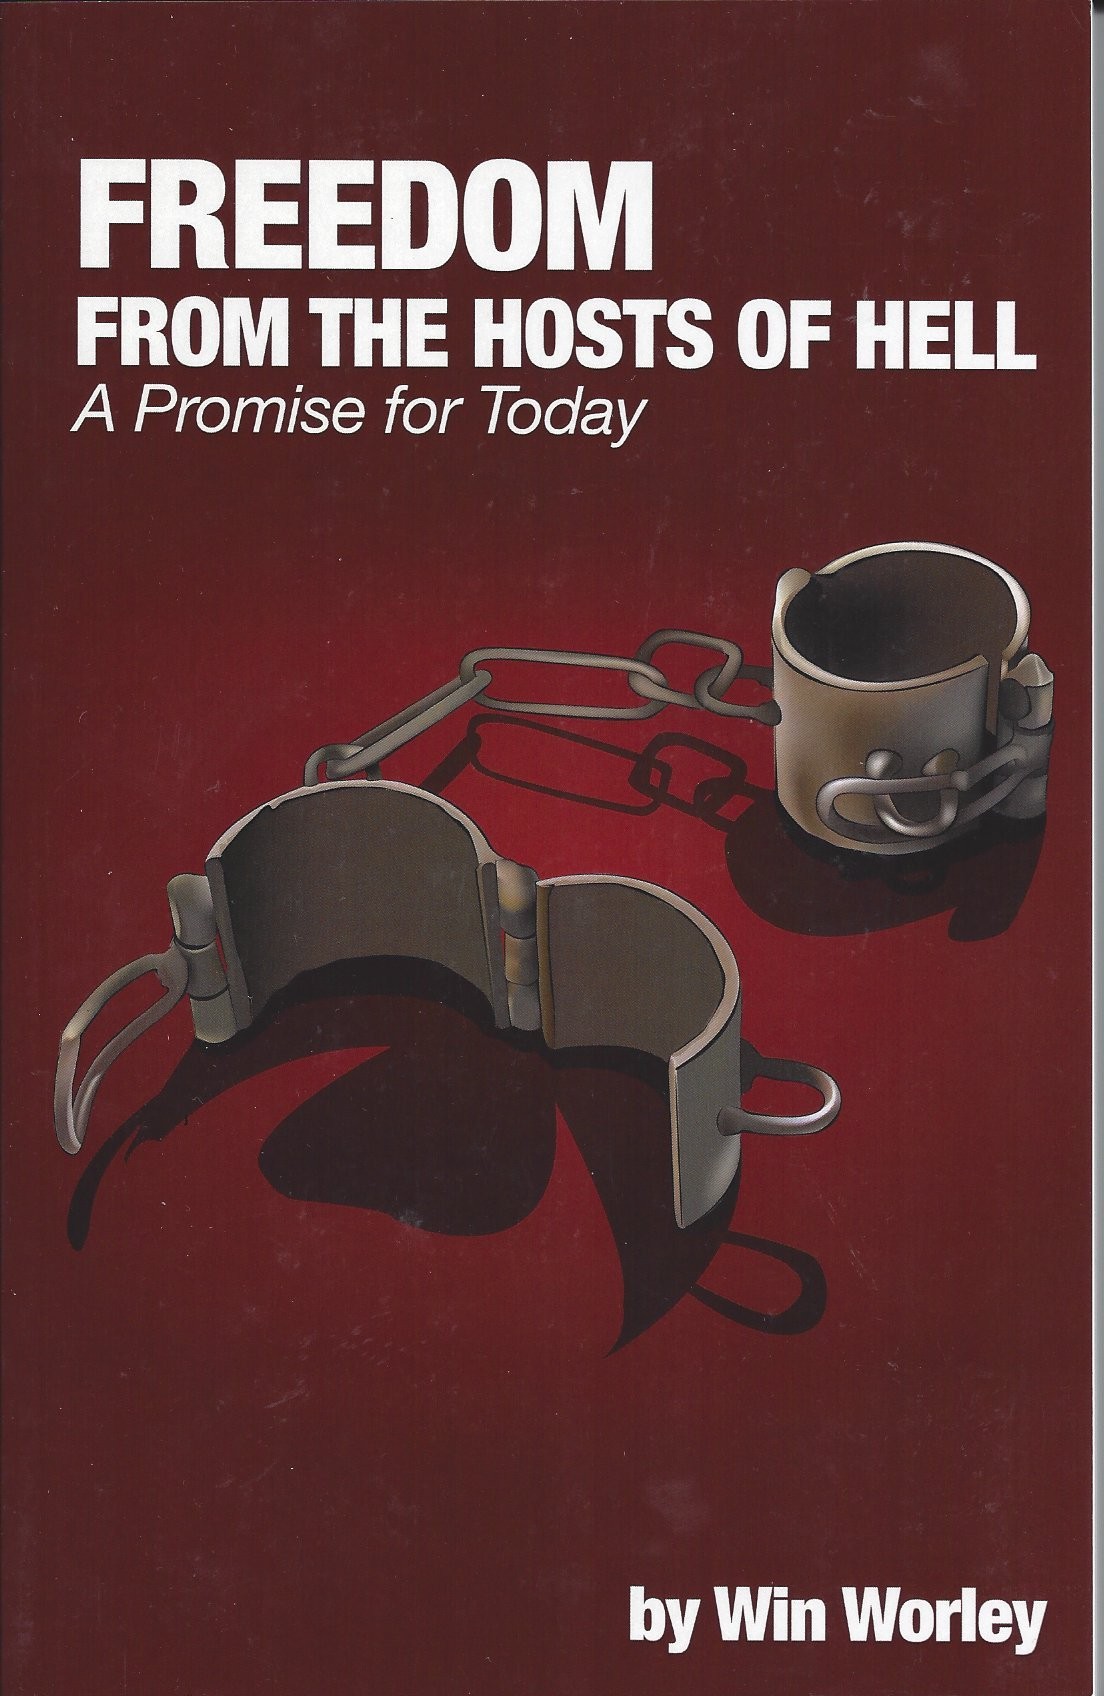 Freedom from The Hosts of Hell – A Promise for Today